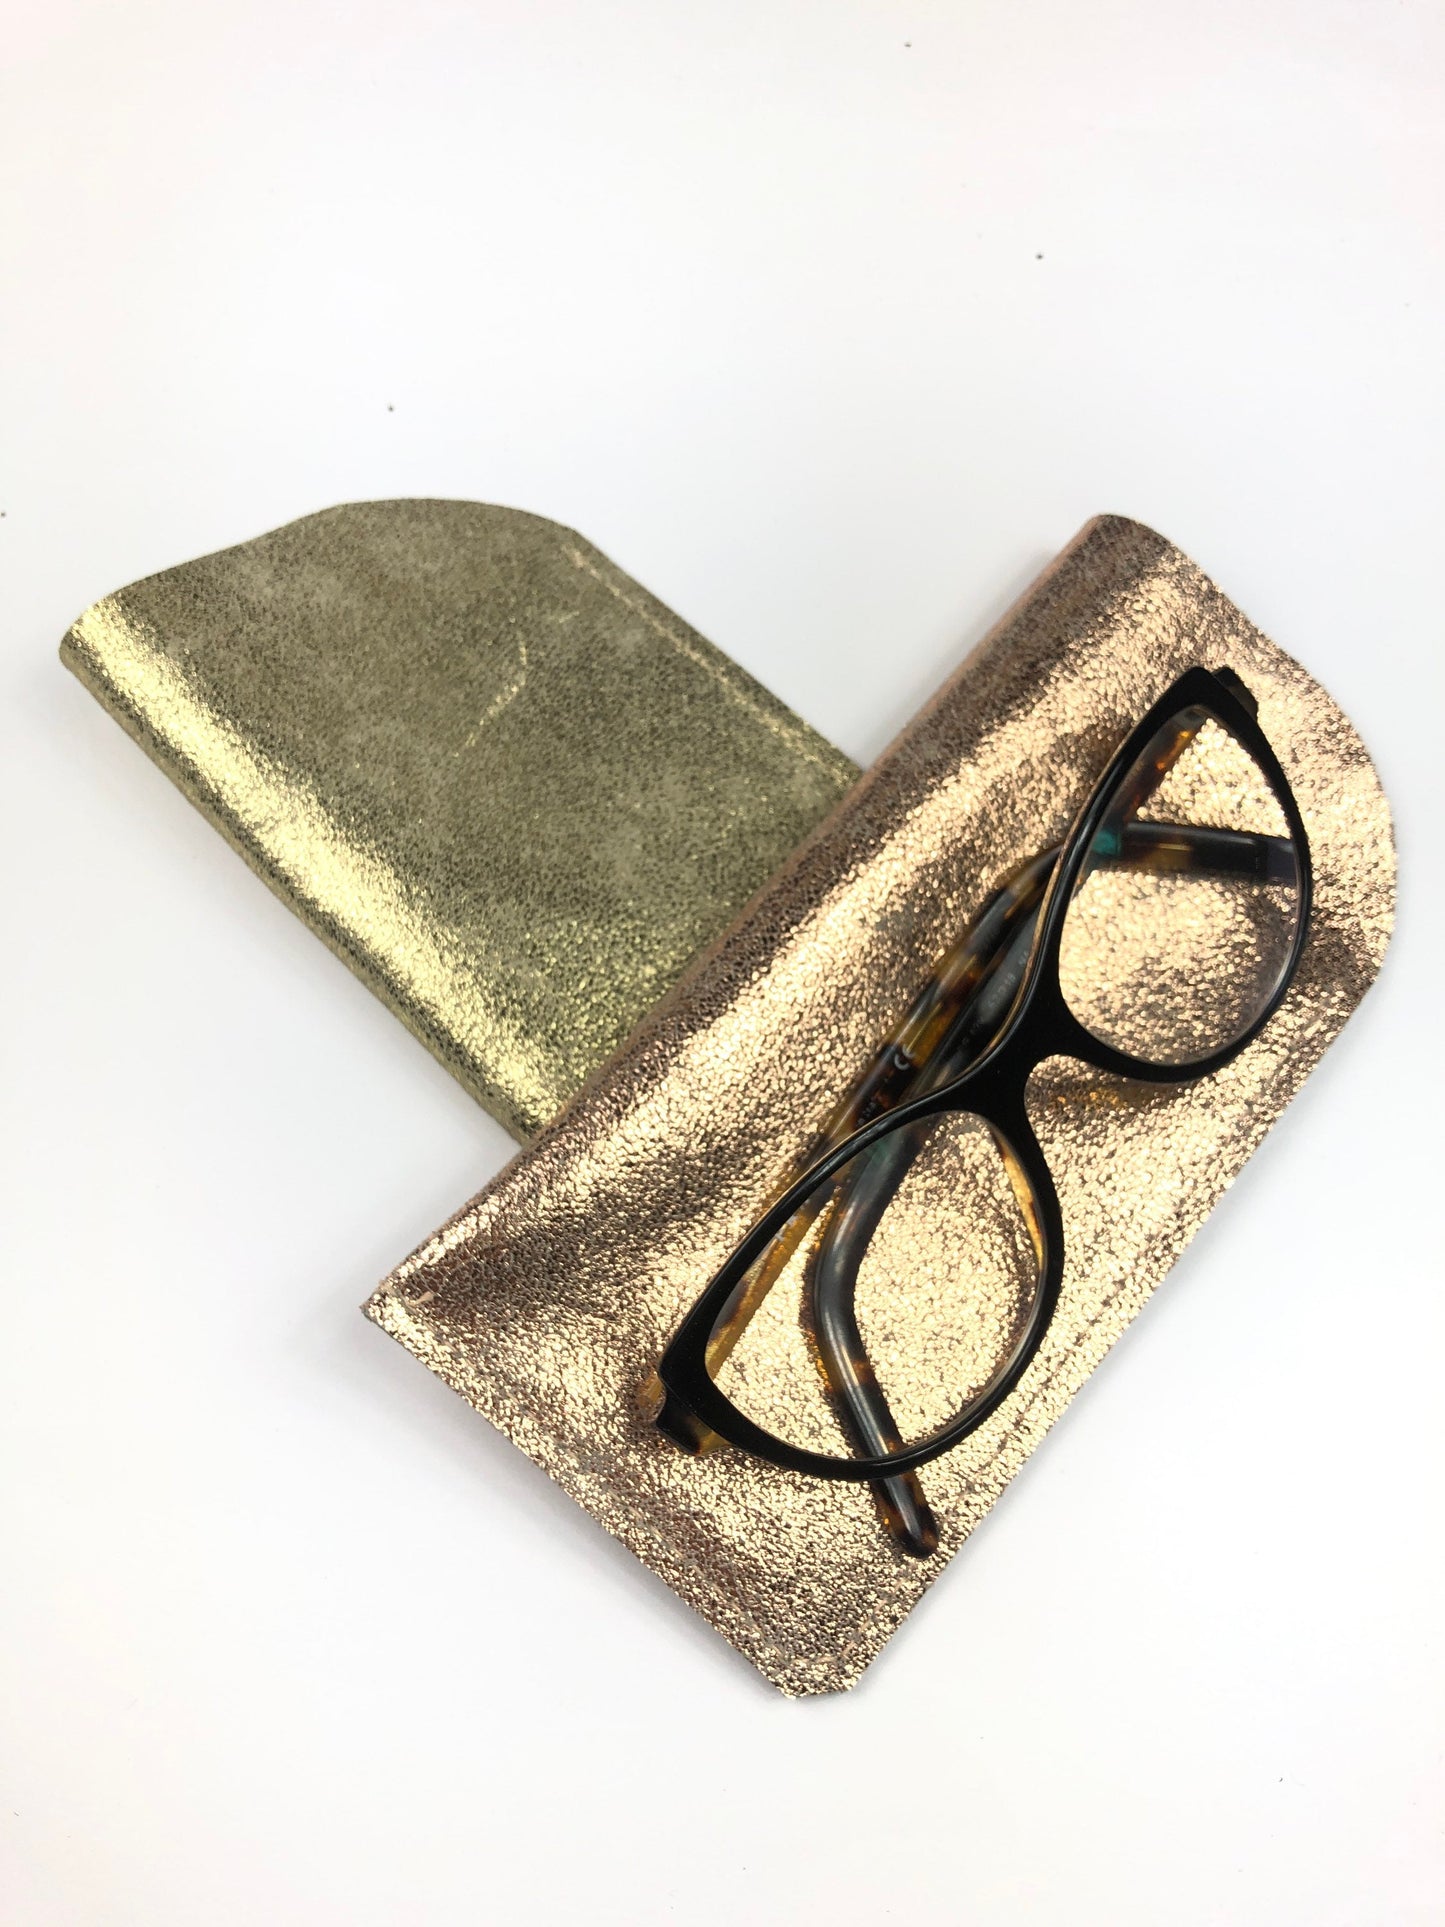 Gold leather glasses case